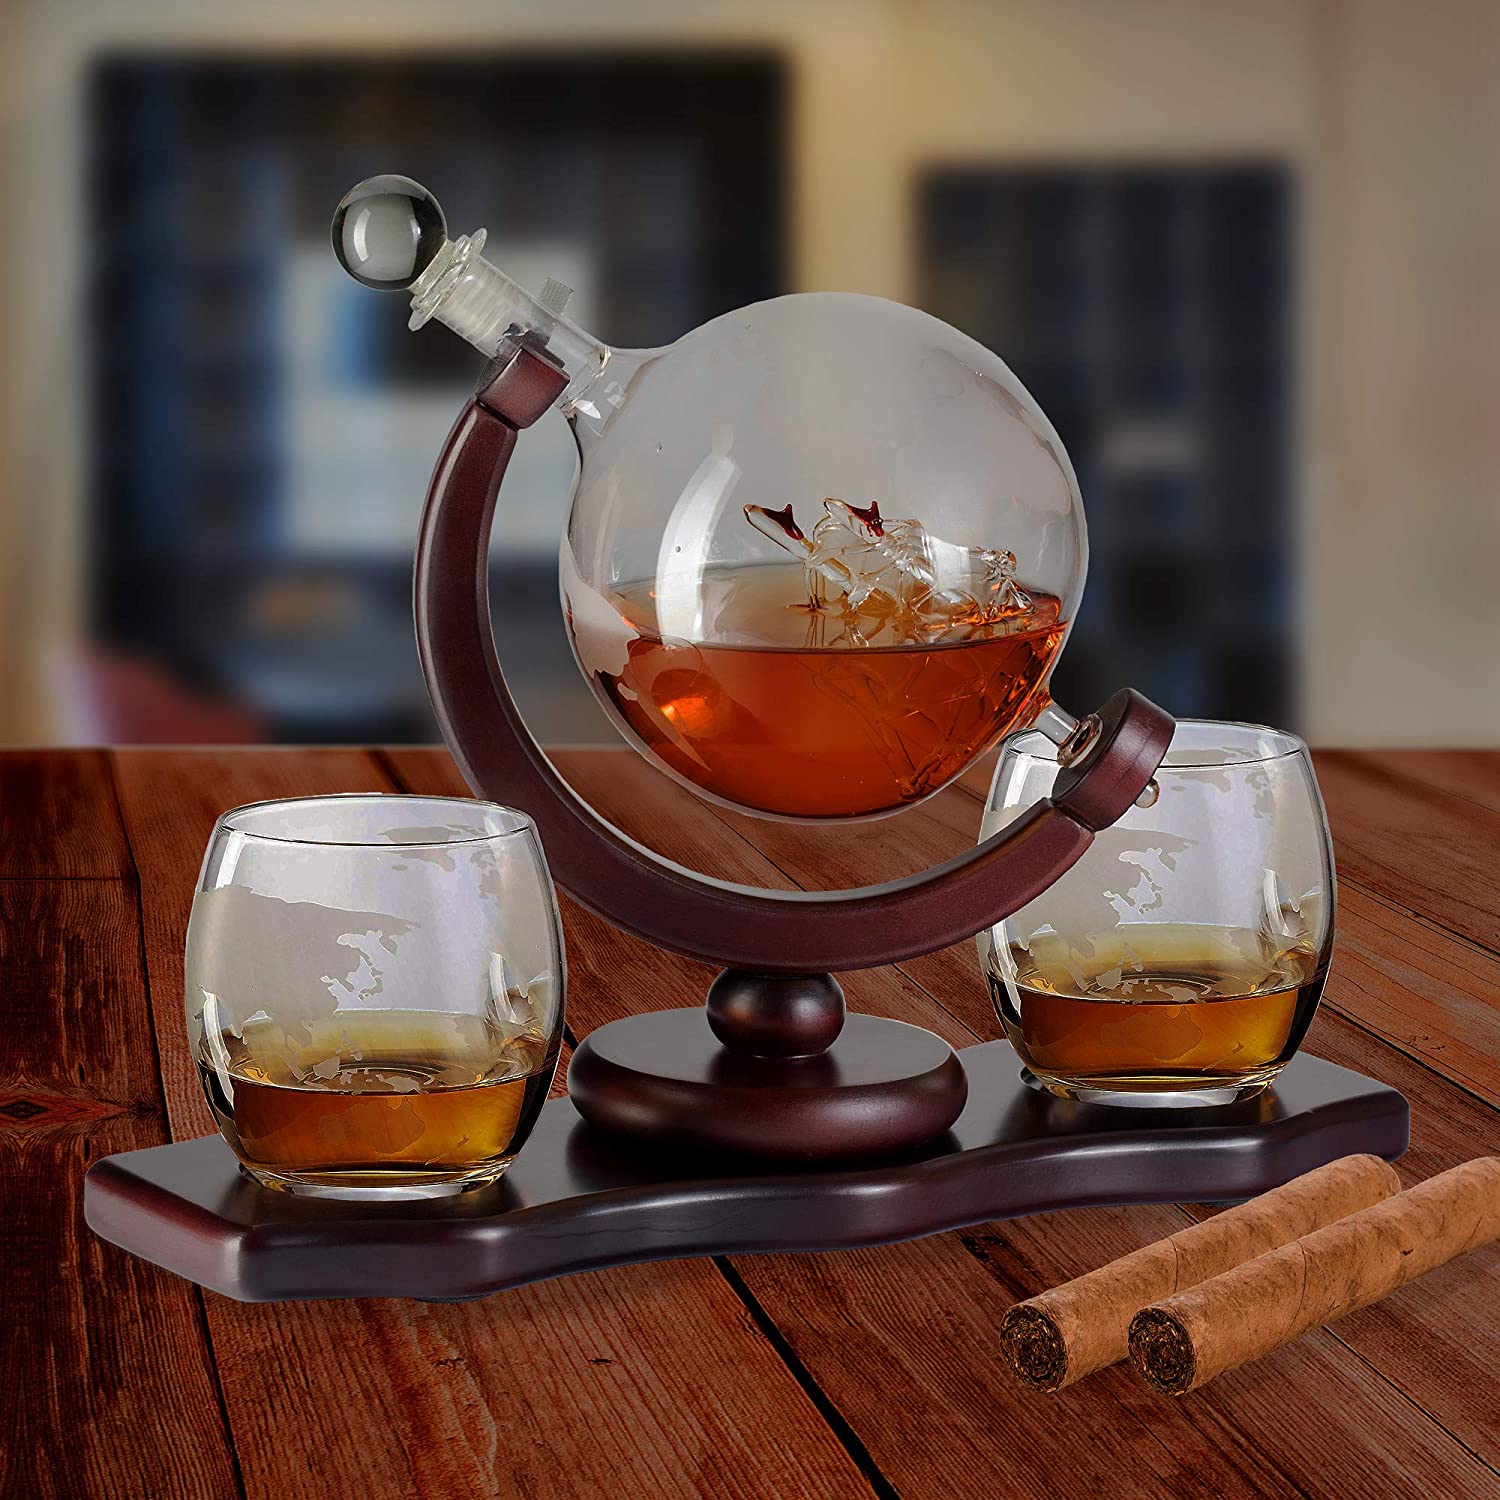 Chefoh Glass Globe Decanter Set w/Whiskey Glasses - Reusable Steel Ice Cubes - Cherry Wood Stand - Tongs - Pour Funnel | Liquor - Wine - Scotch | Vintage Home - Dining - Bar Decor